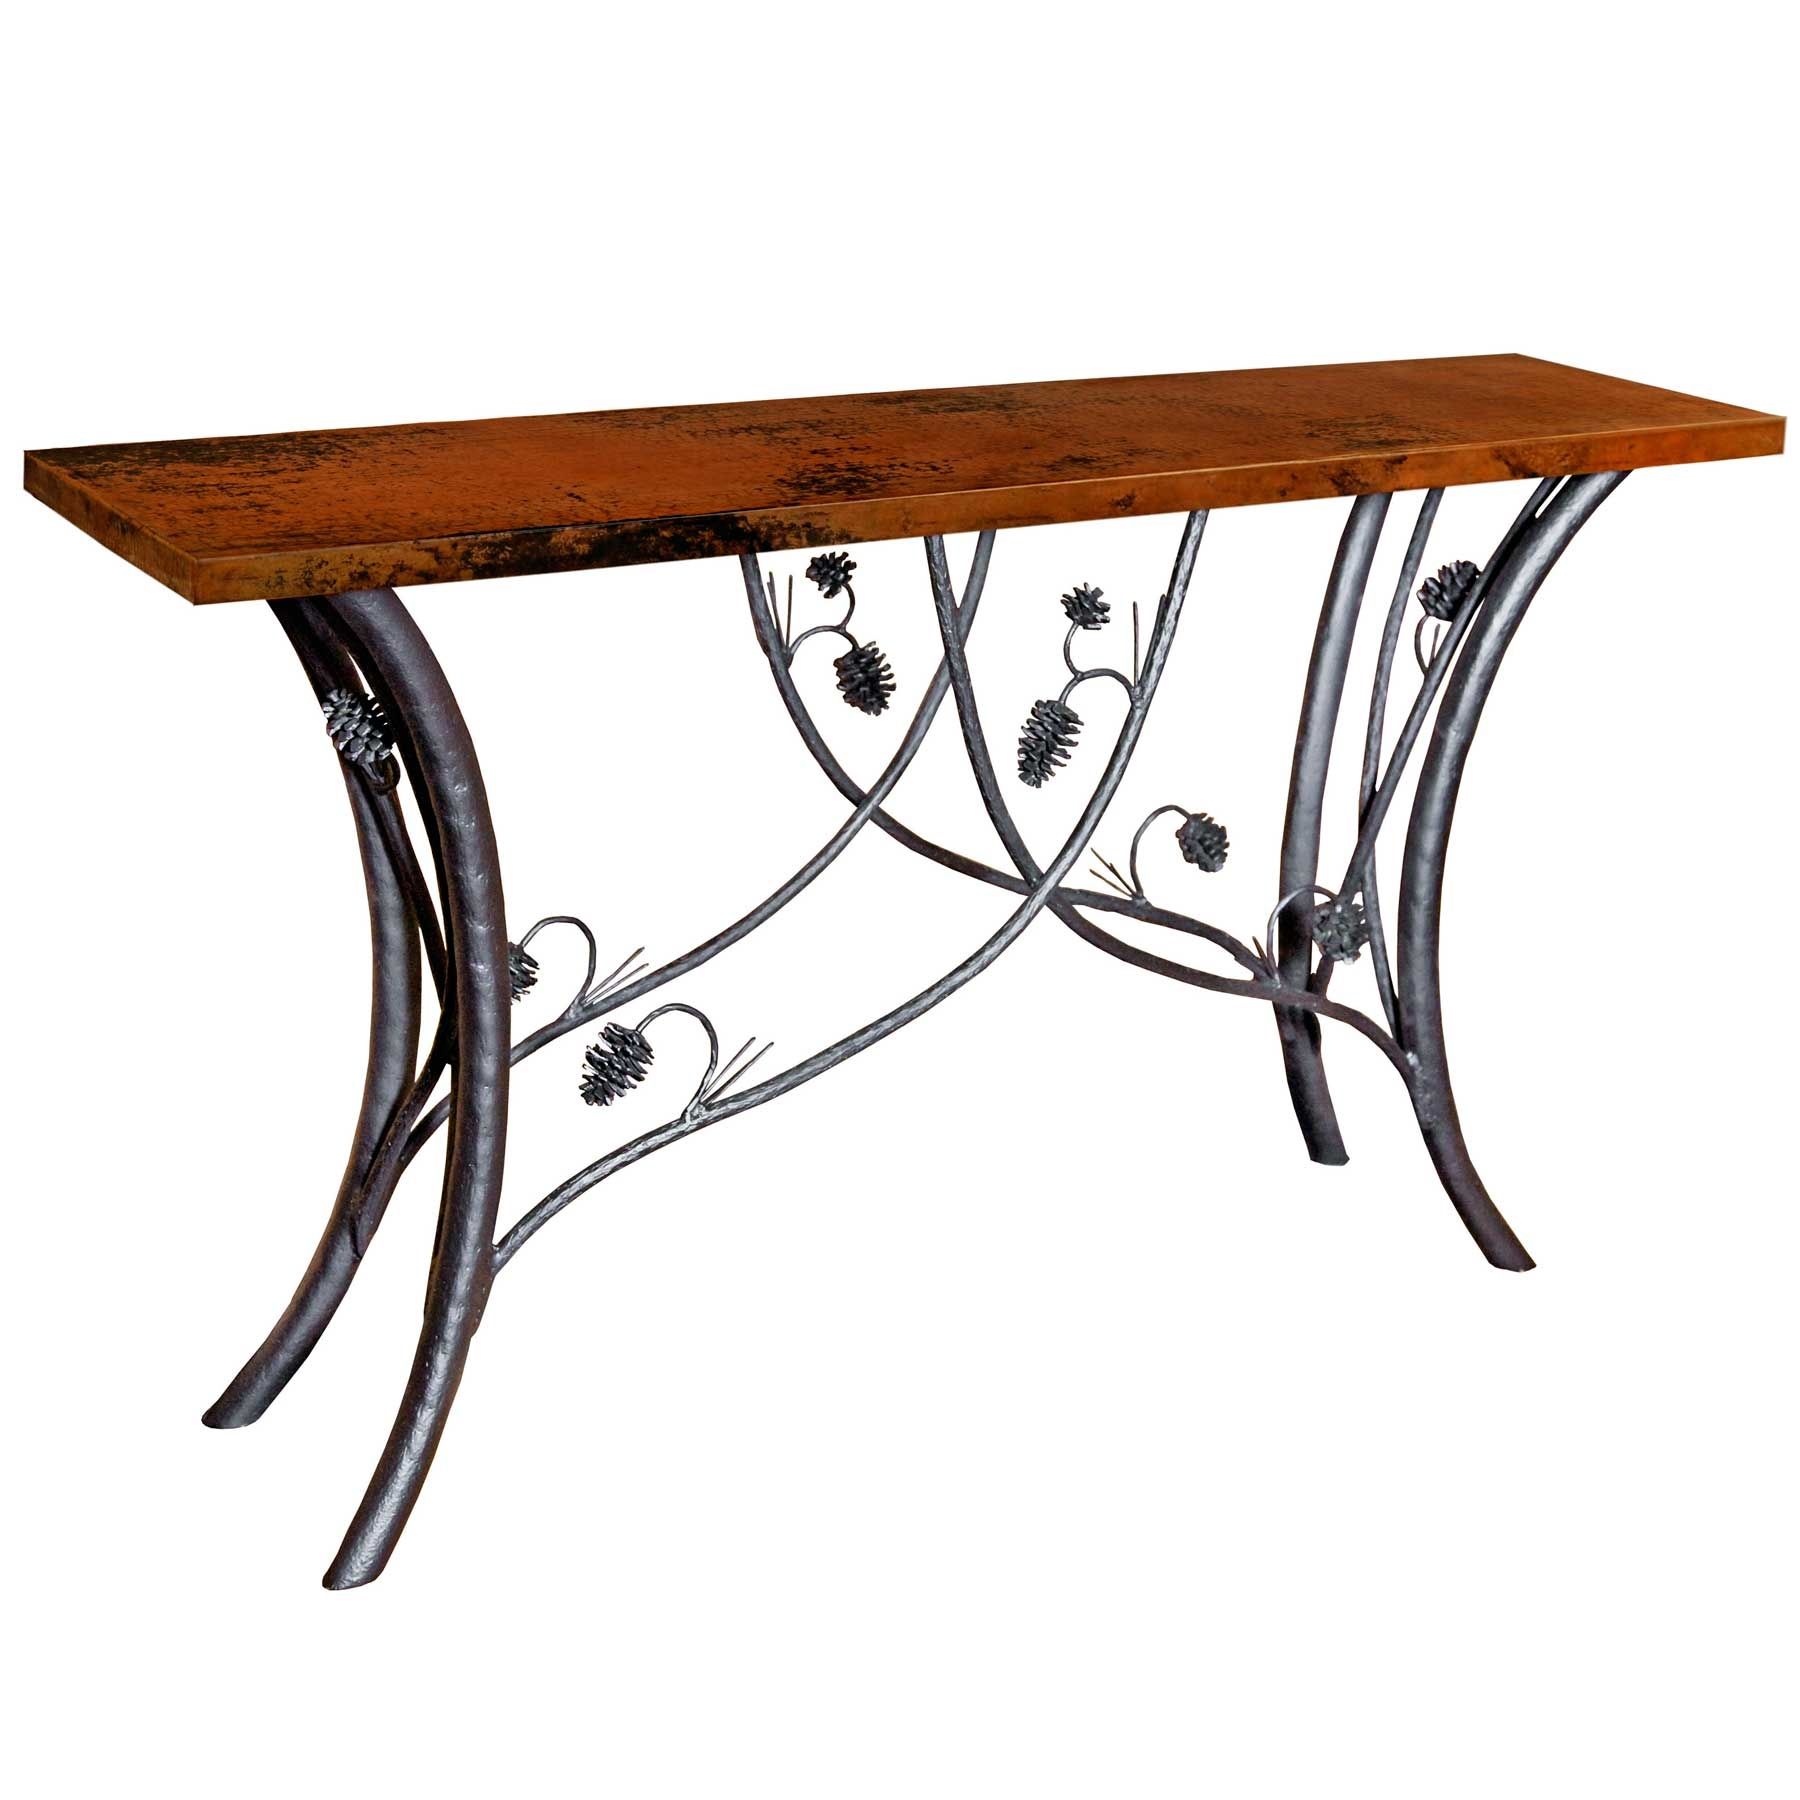 Pictured Here Is The Piney Woods Console Table With 60" X Inside Round Iron Console Tables (View 13 of 20)